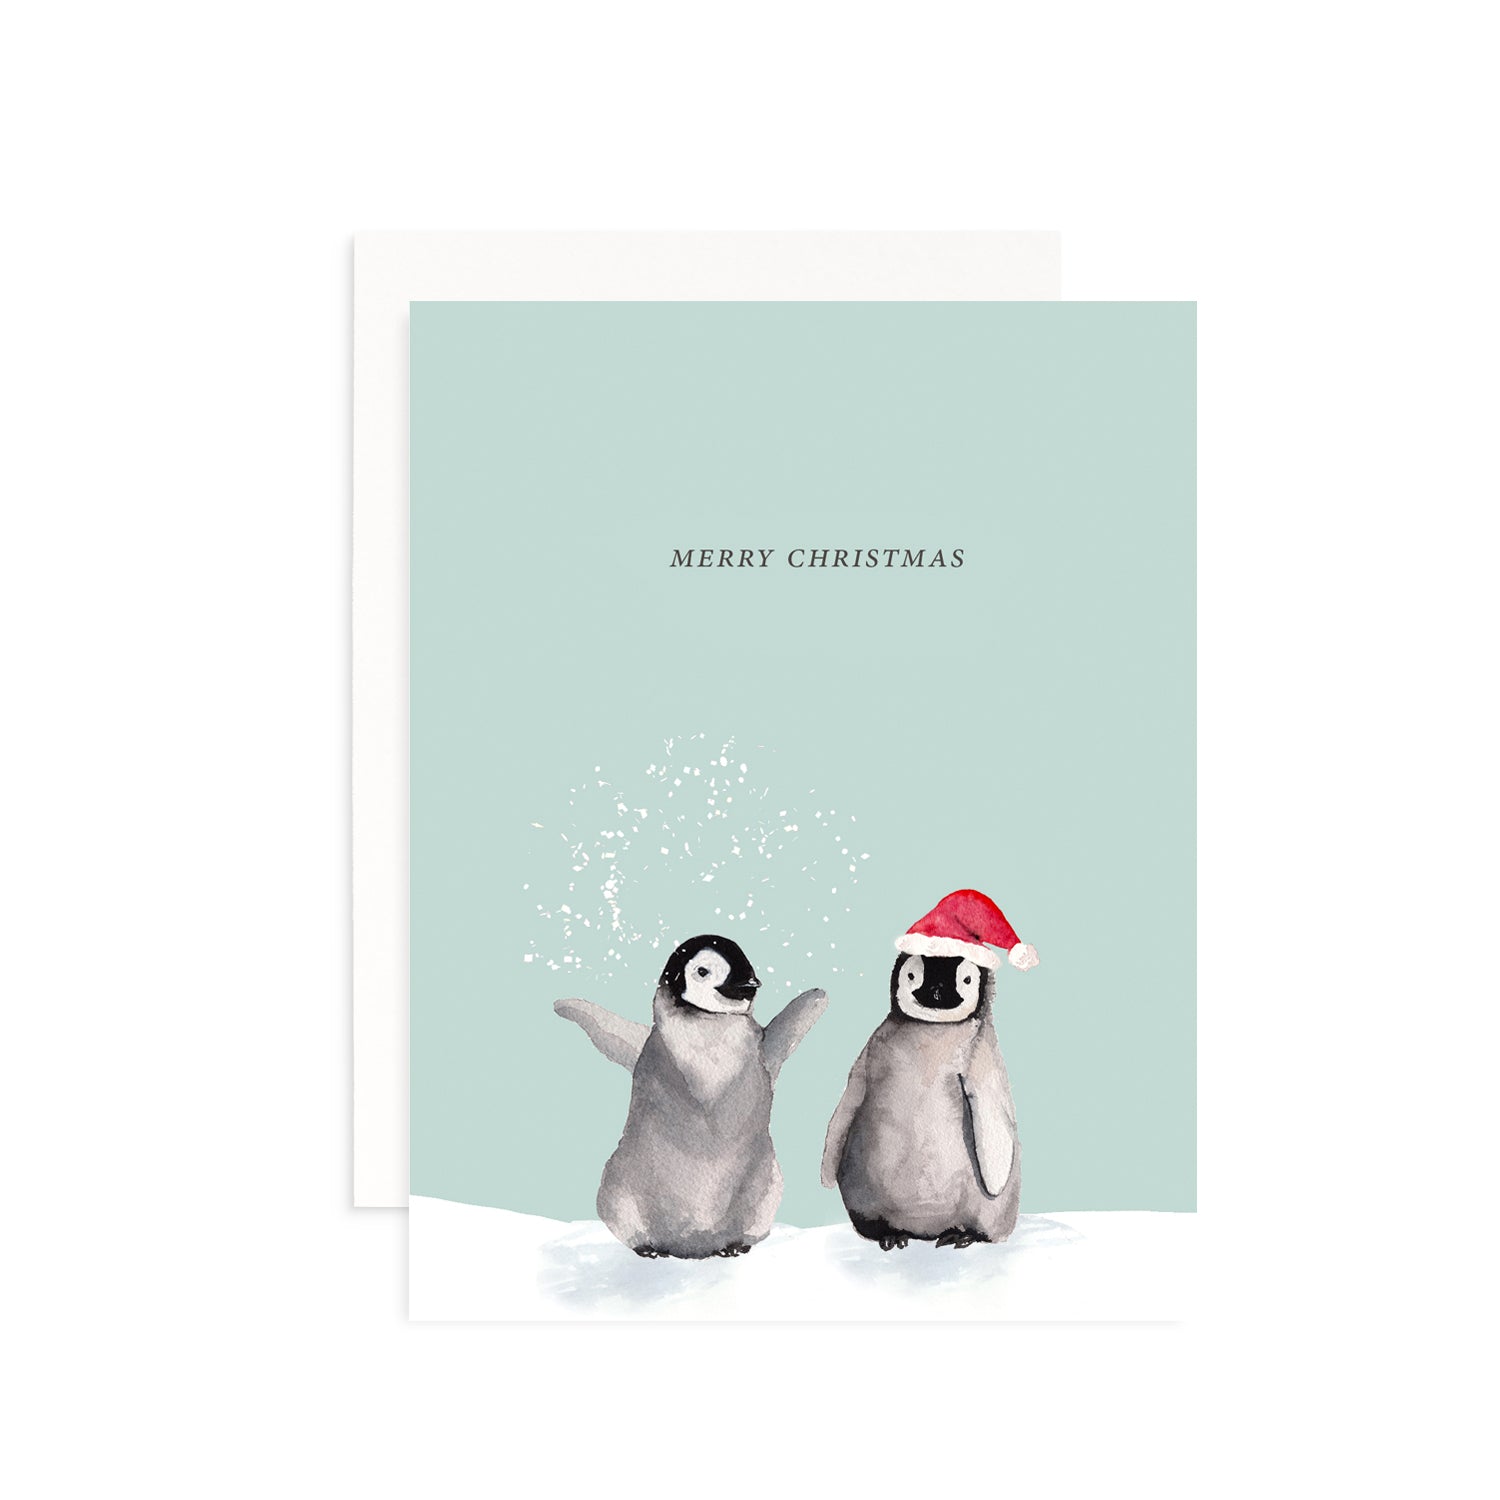 merry christmas cute pictures